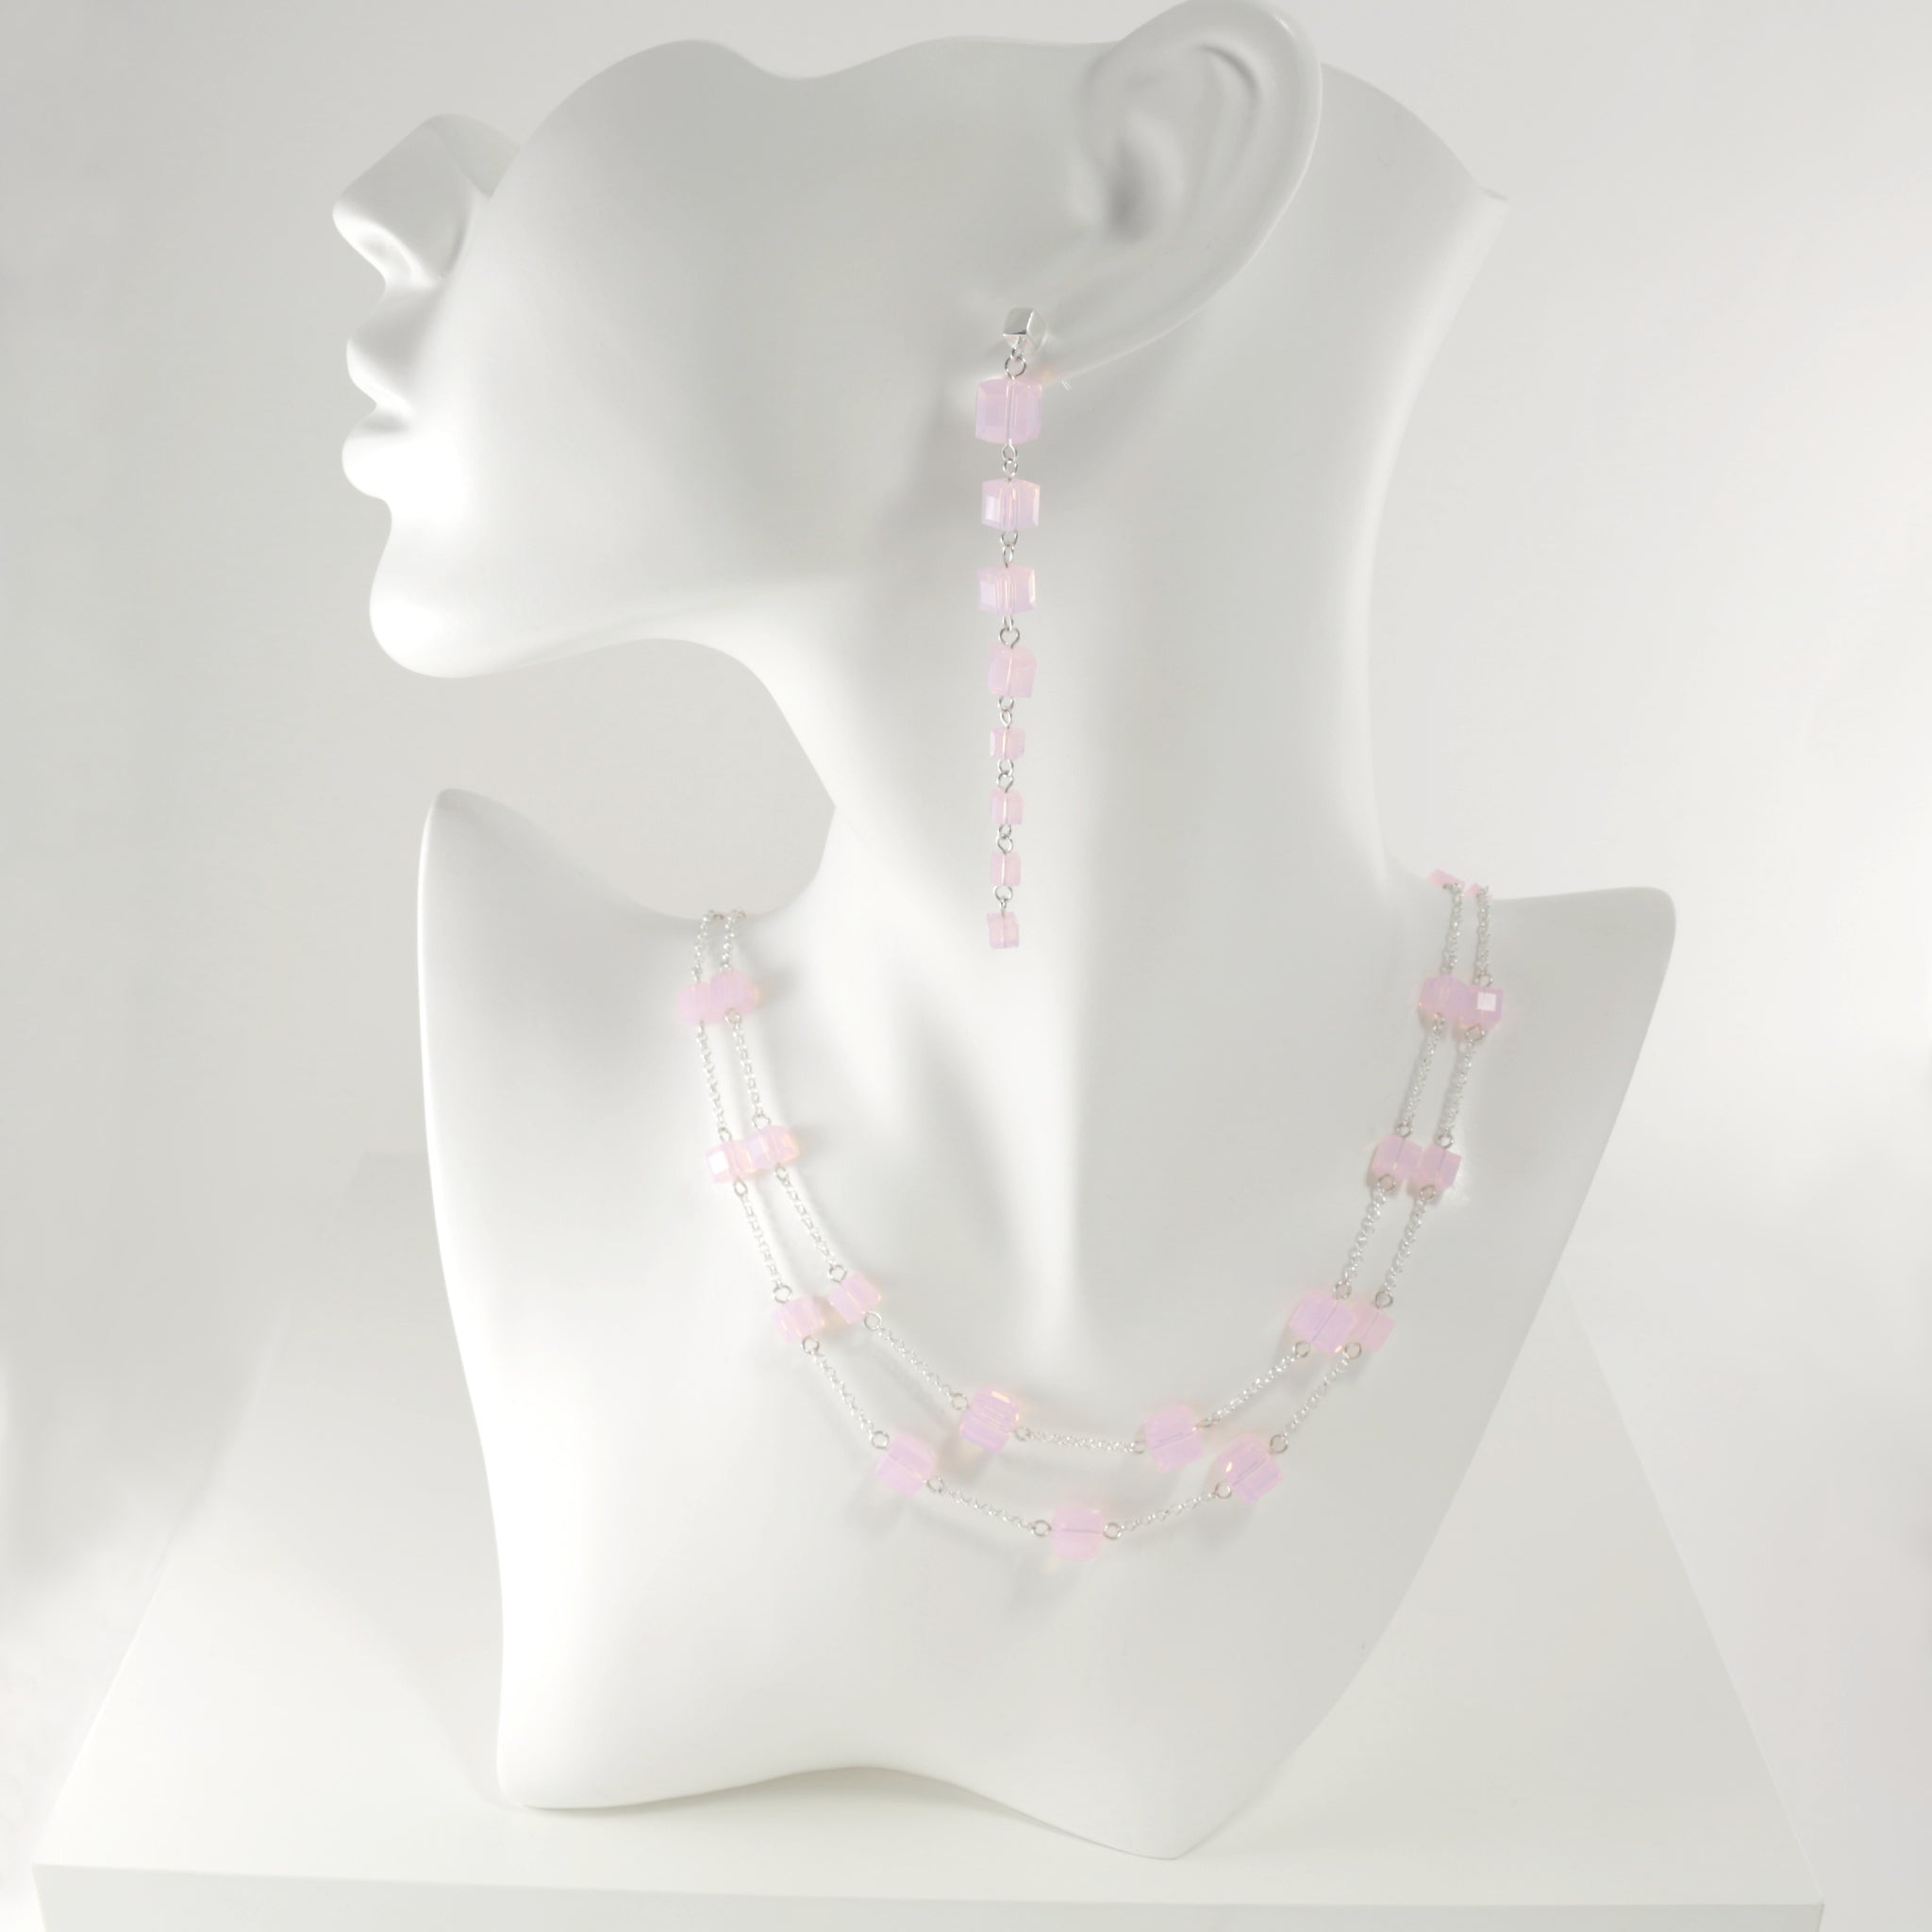 Earrings and necklace set containing milky powder light pink cubed Swarovski crystals and sterling silver 